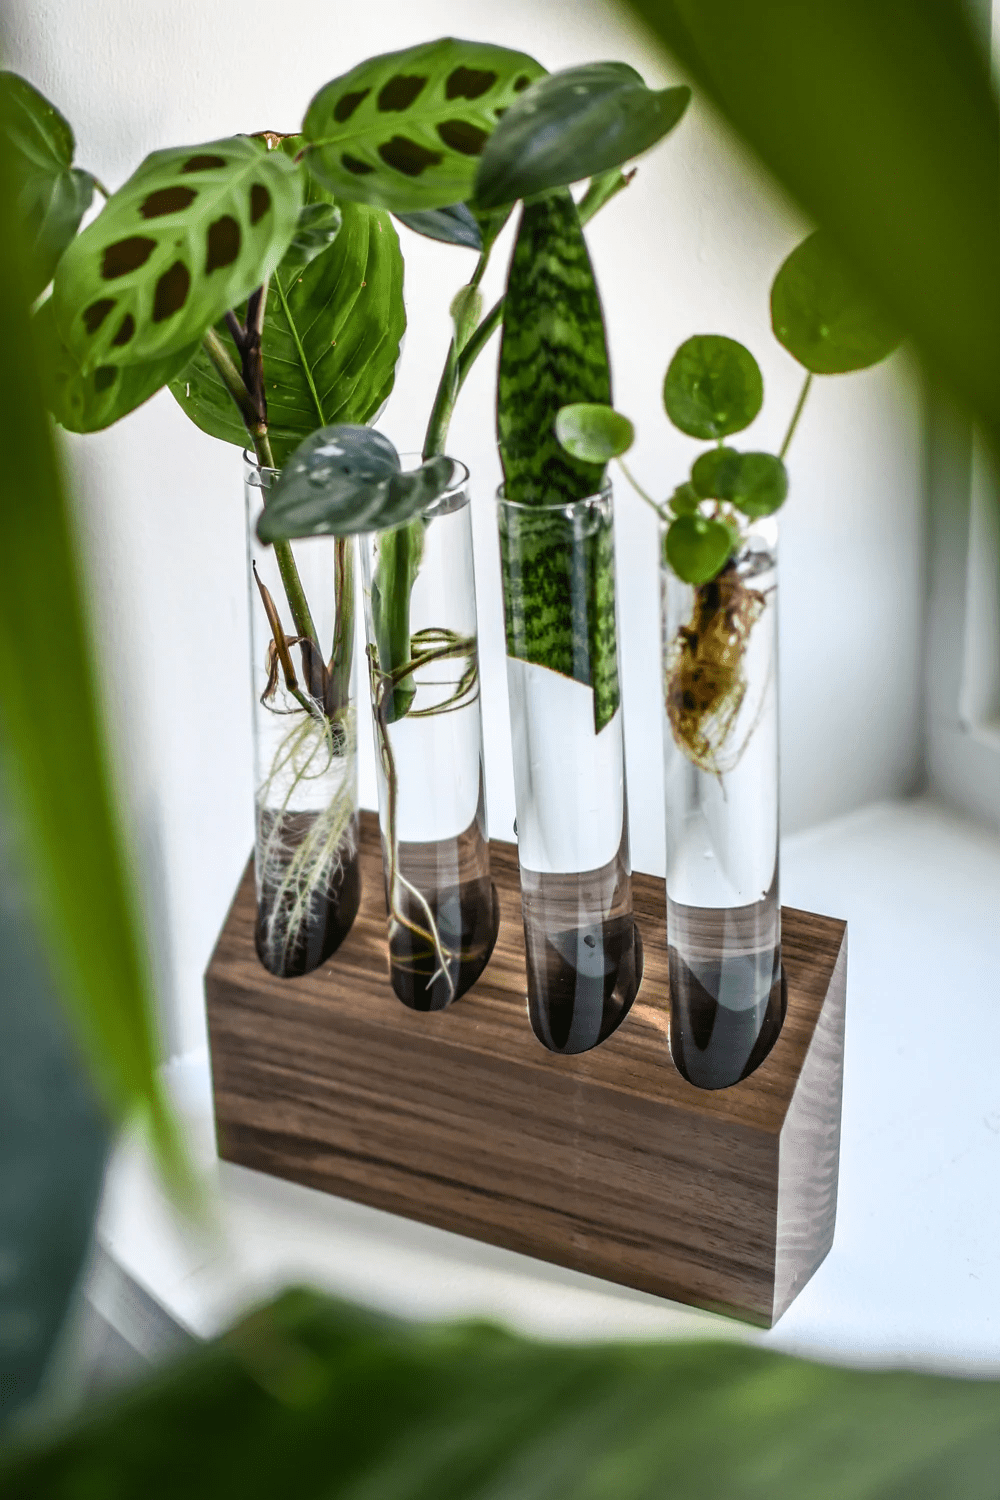 Four glass tubes in a wooden block with plant propogations in them.